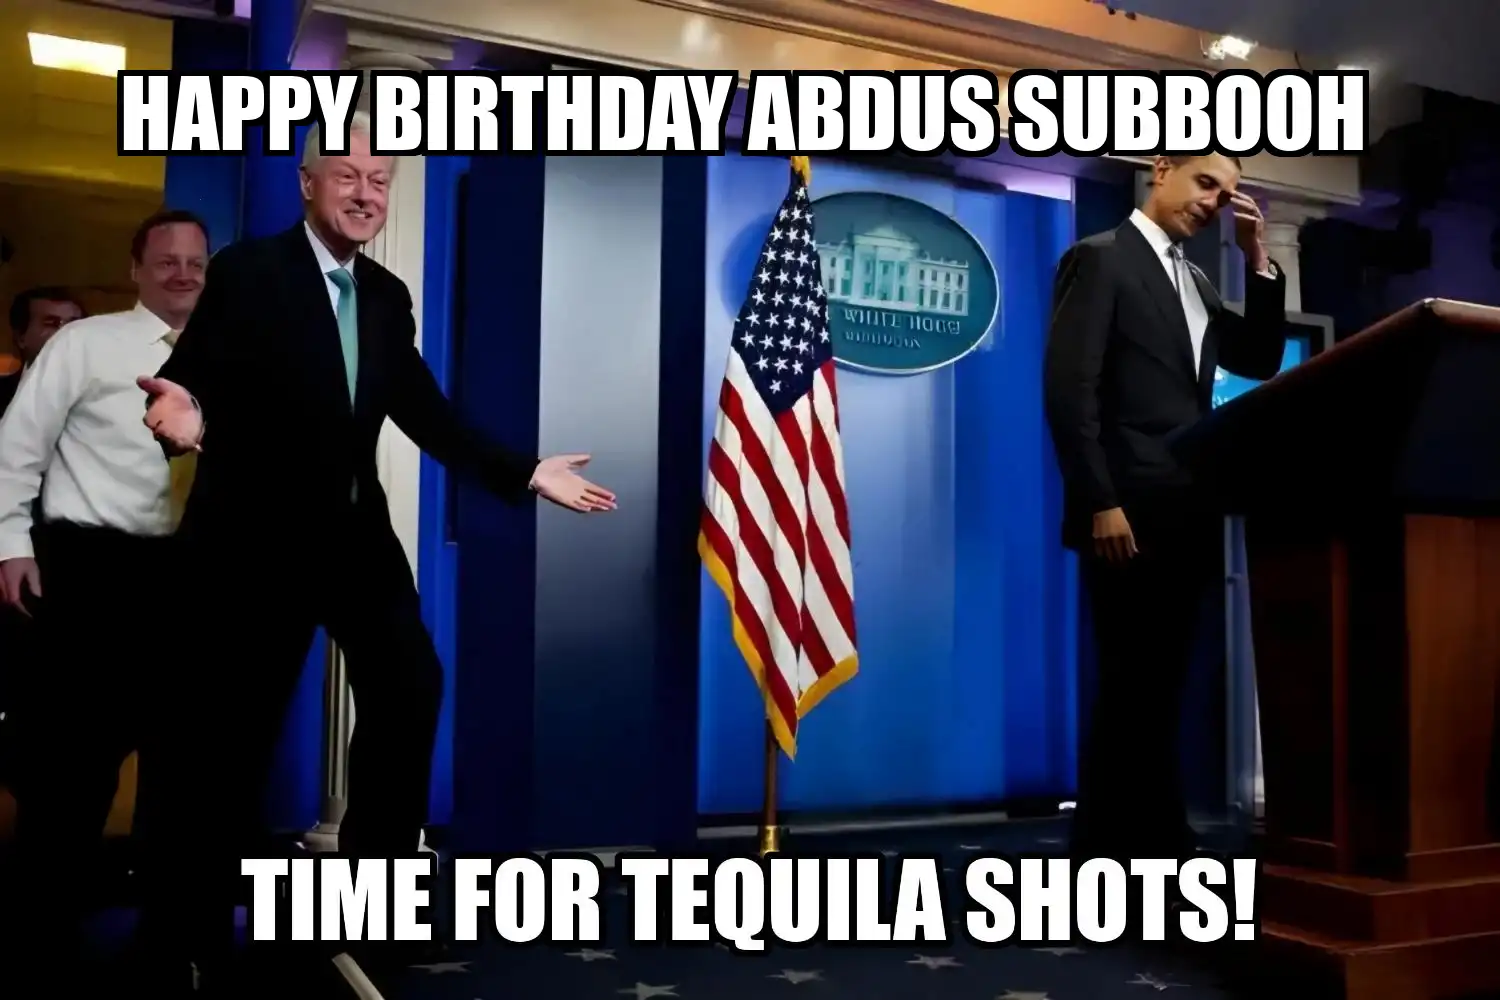 Happy Birthday Abdus Subbooh Time For Tequila Shots Memes